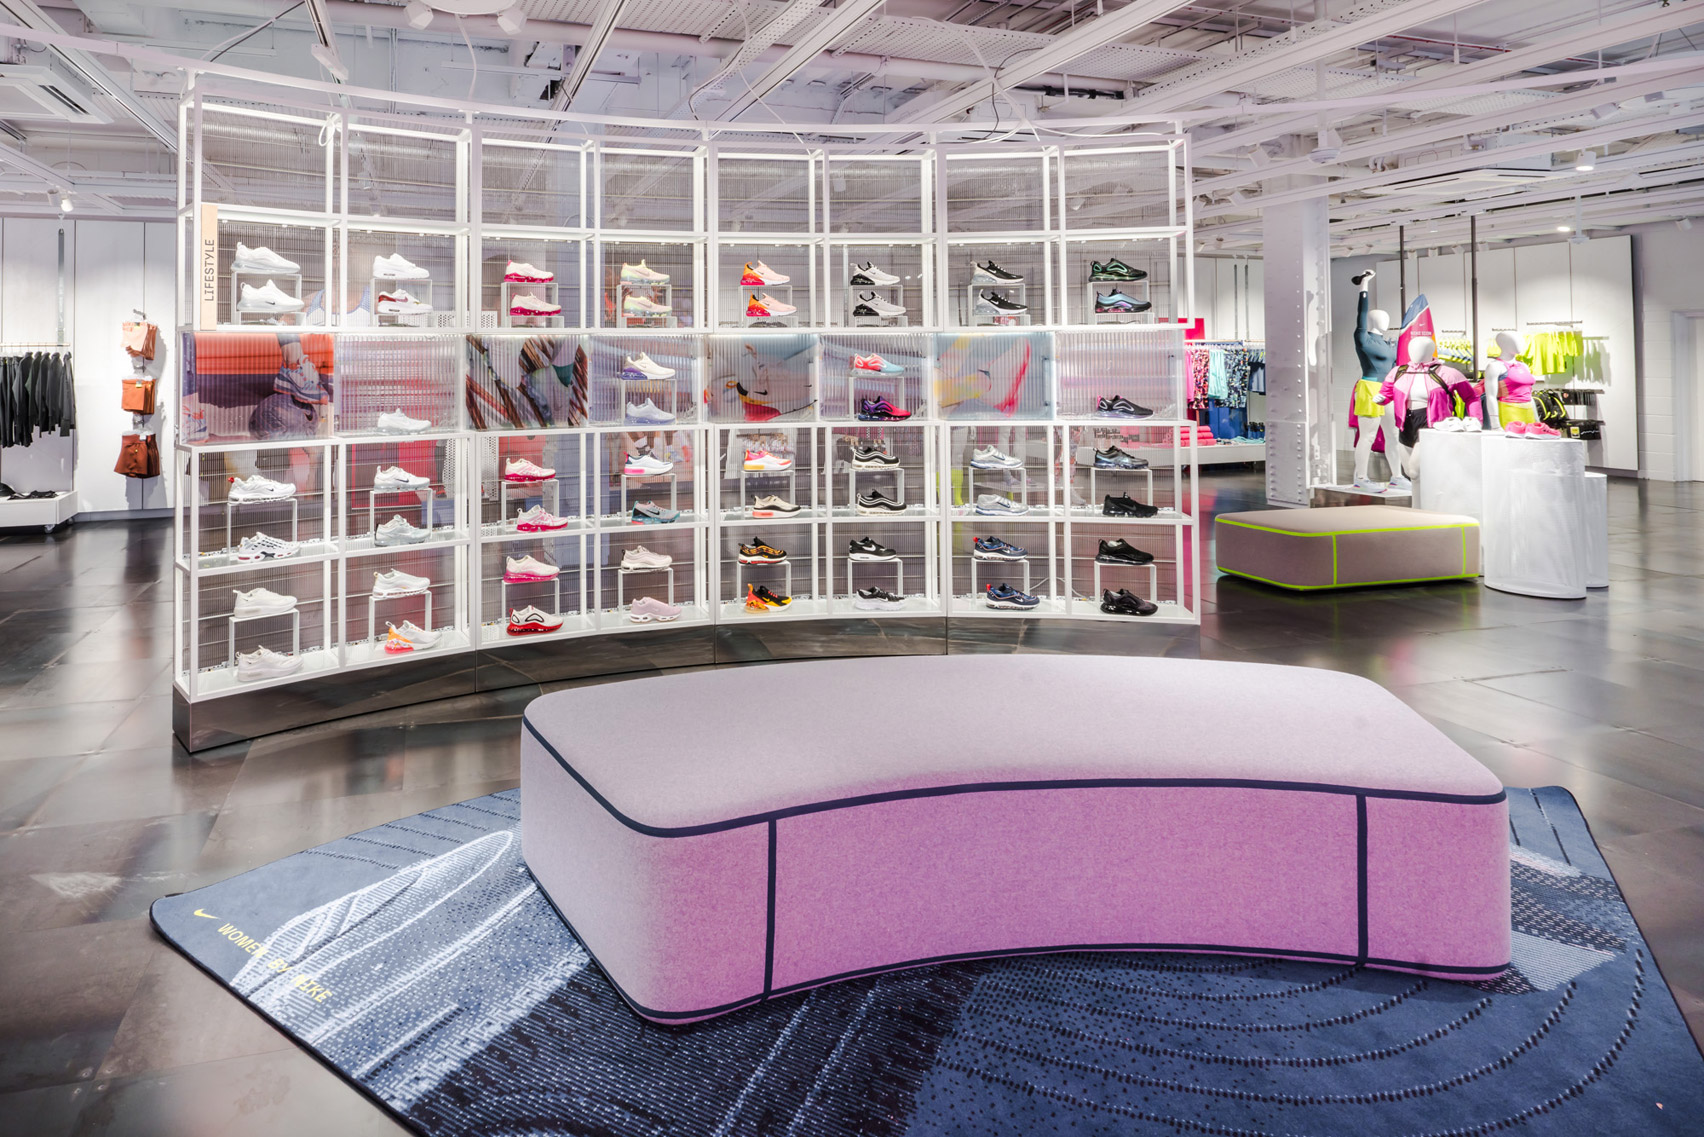 A redesign of the women's floor of Nike's London flagship shops includes plus-size mannequins and para-sport mannequins to model its clothing ranges.